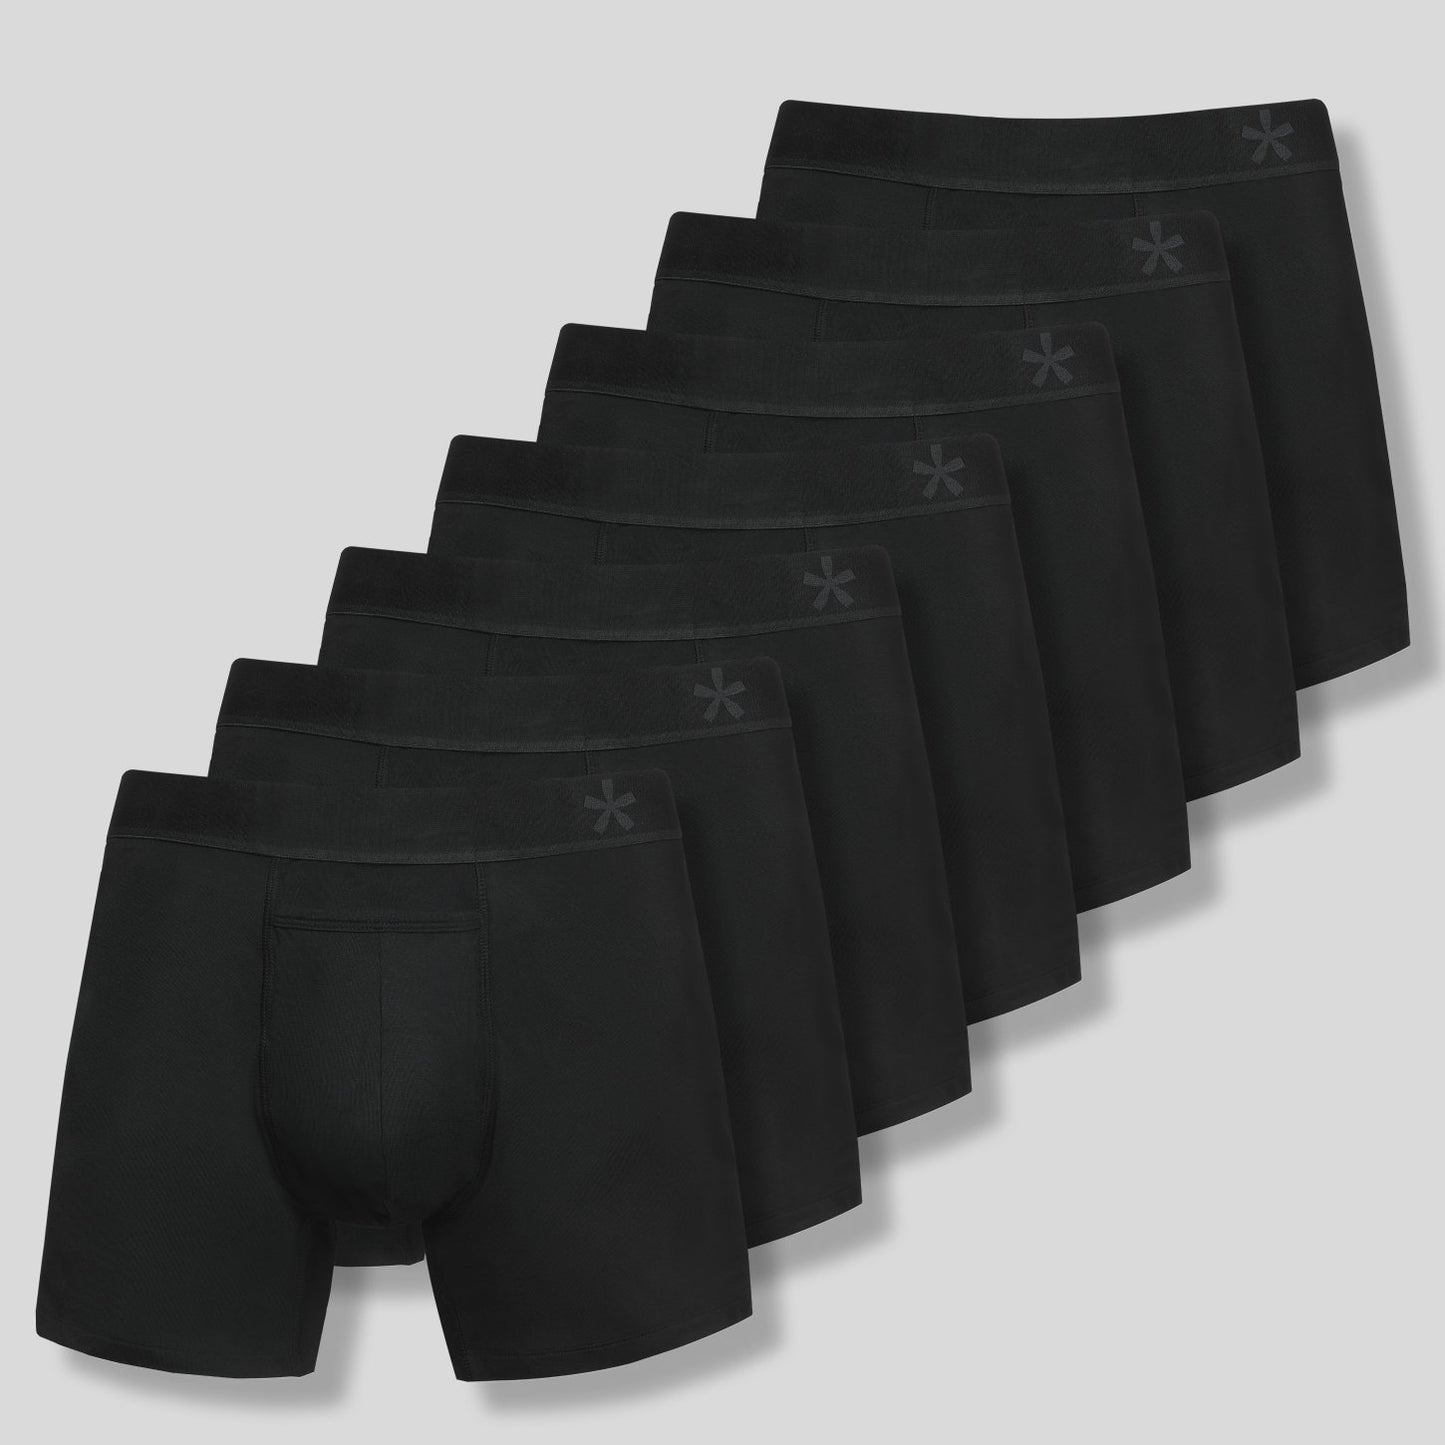 Best Men's Underwear for Working Out: A Comprehensive Guide – Manmade